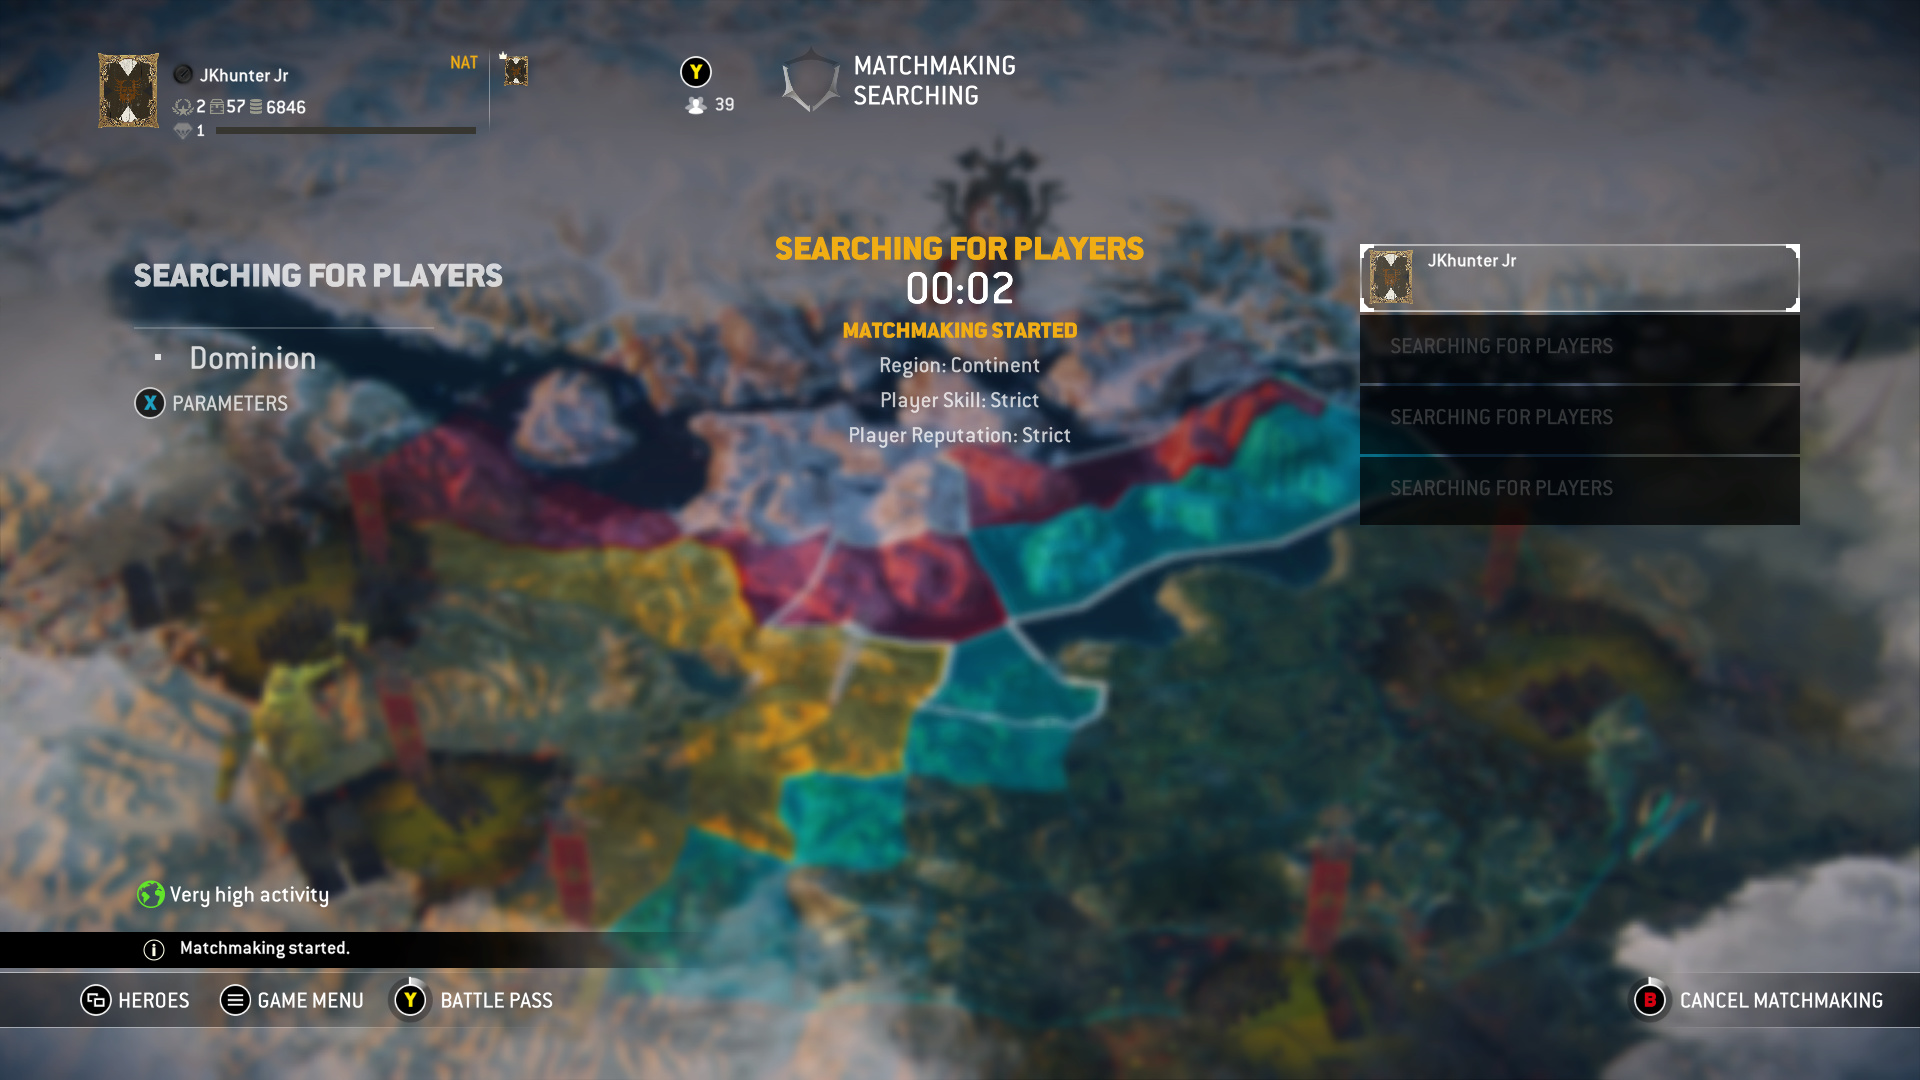 An in-game screenshot from For Honor displaying the matchmaking screen with a timer and several matchmaking parameters.